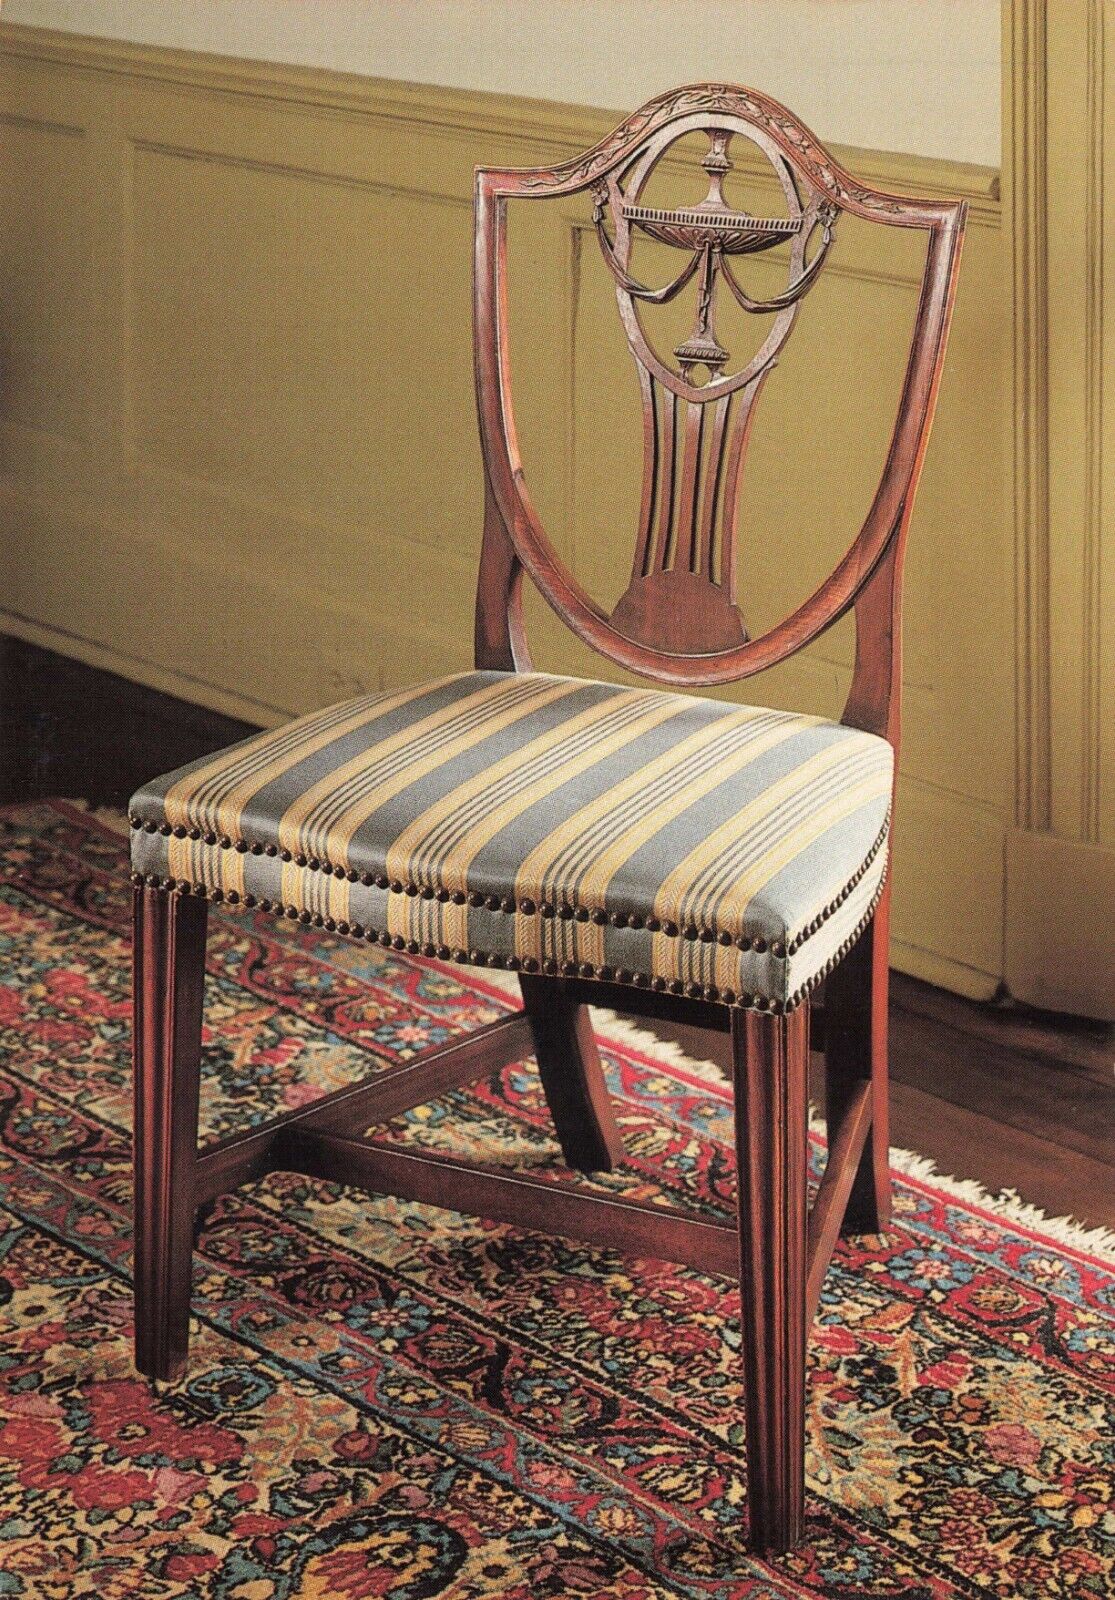 Postcard Furniture Benjamin Frothingham Chair by Samuel McIntire Knoxville TN